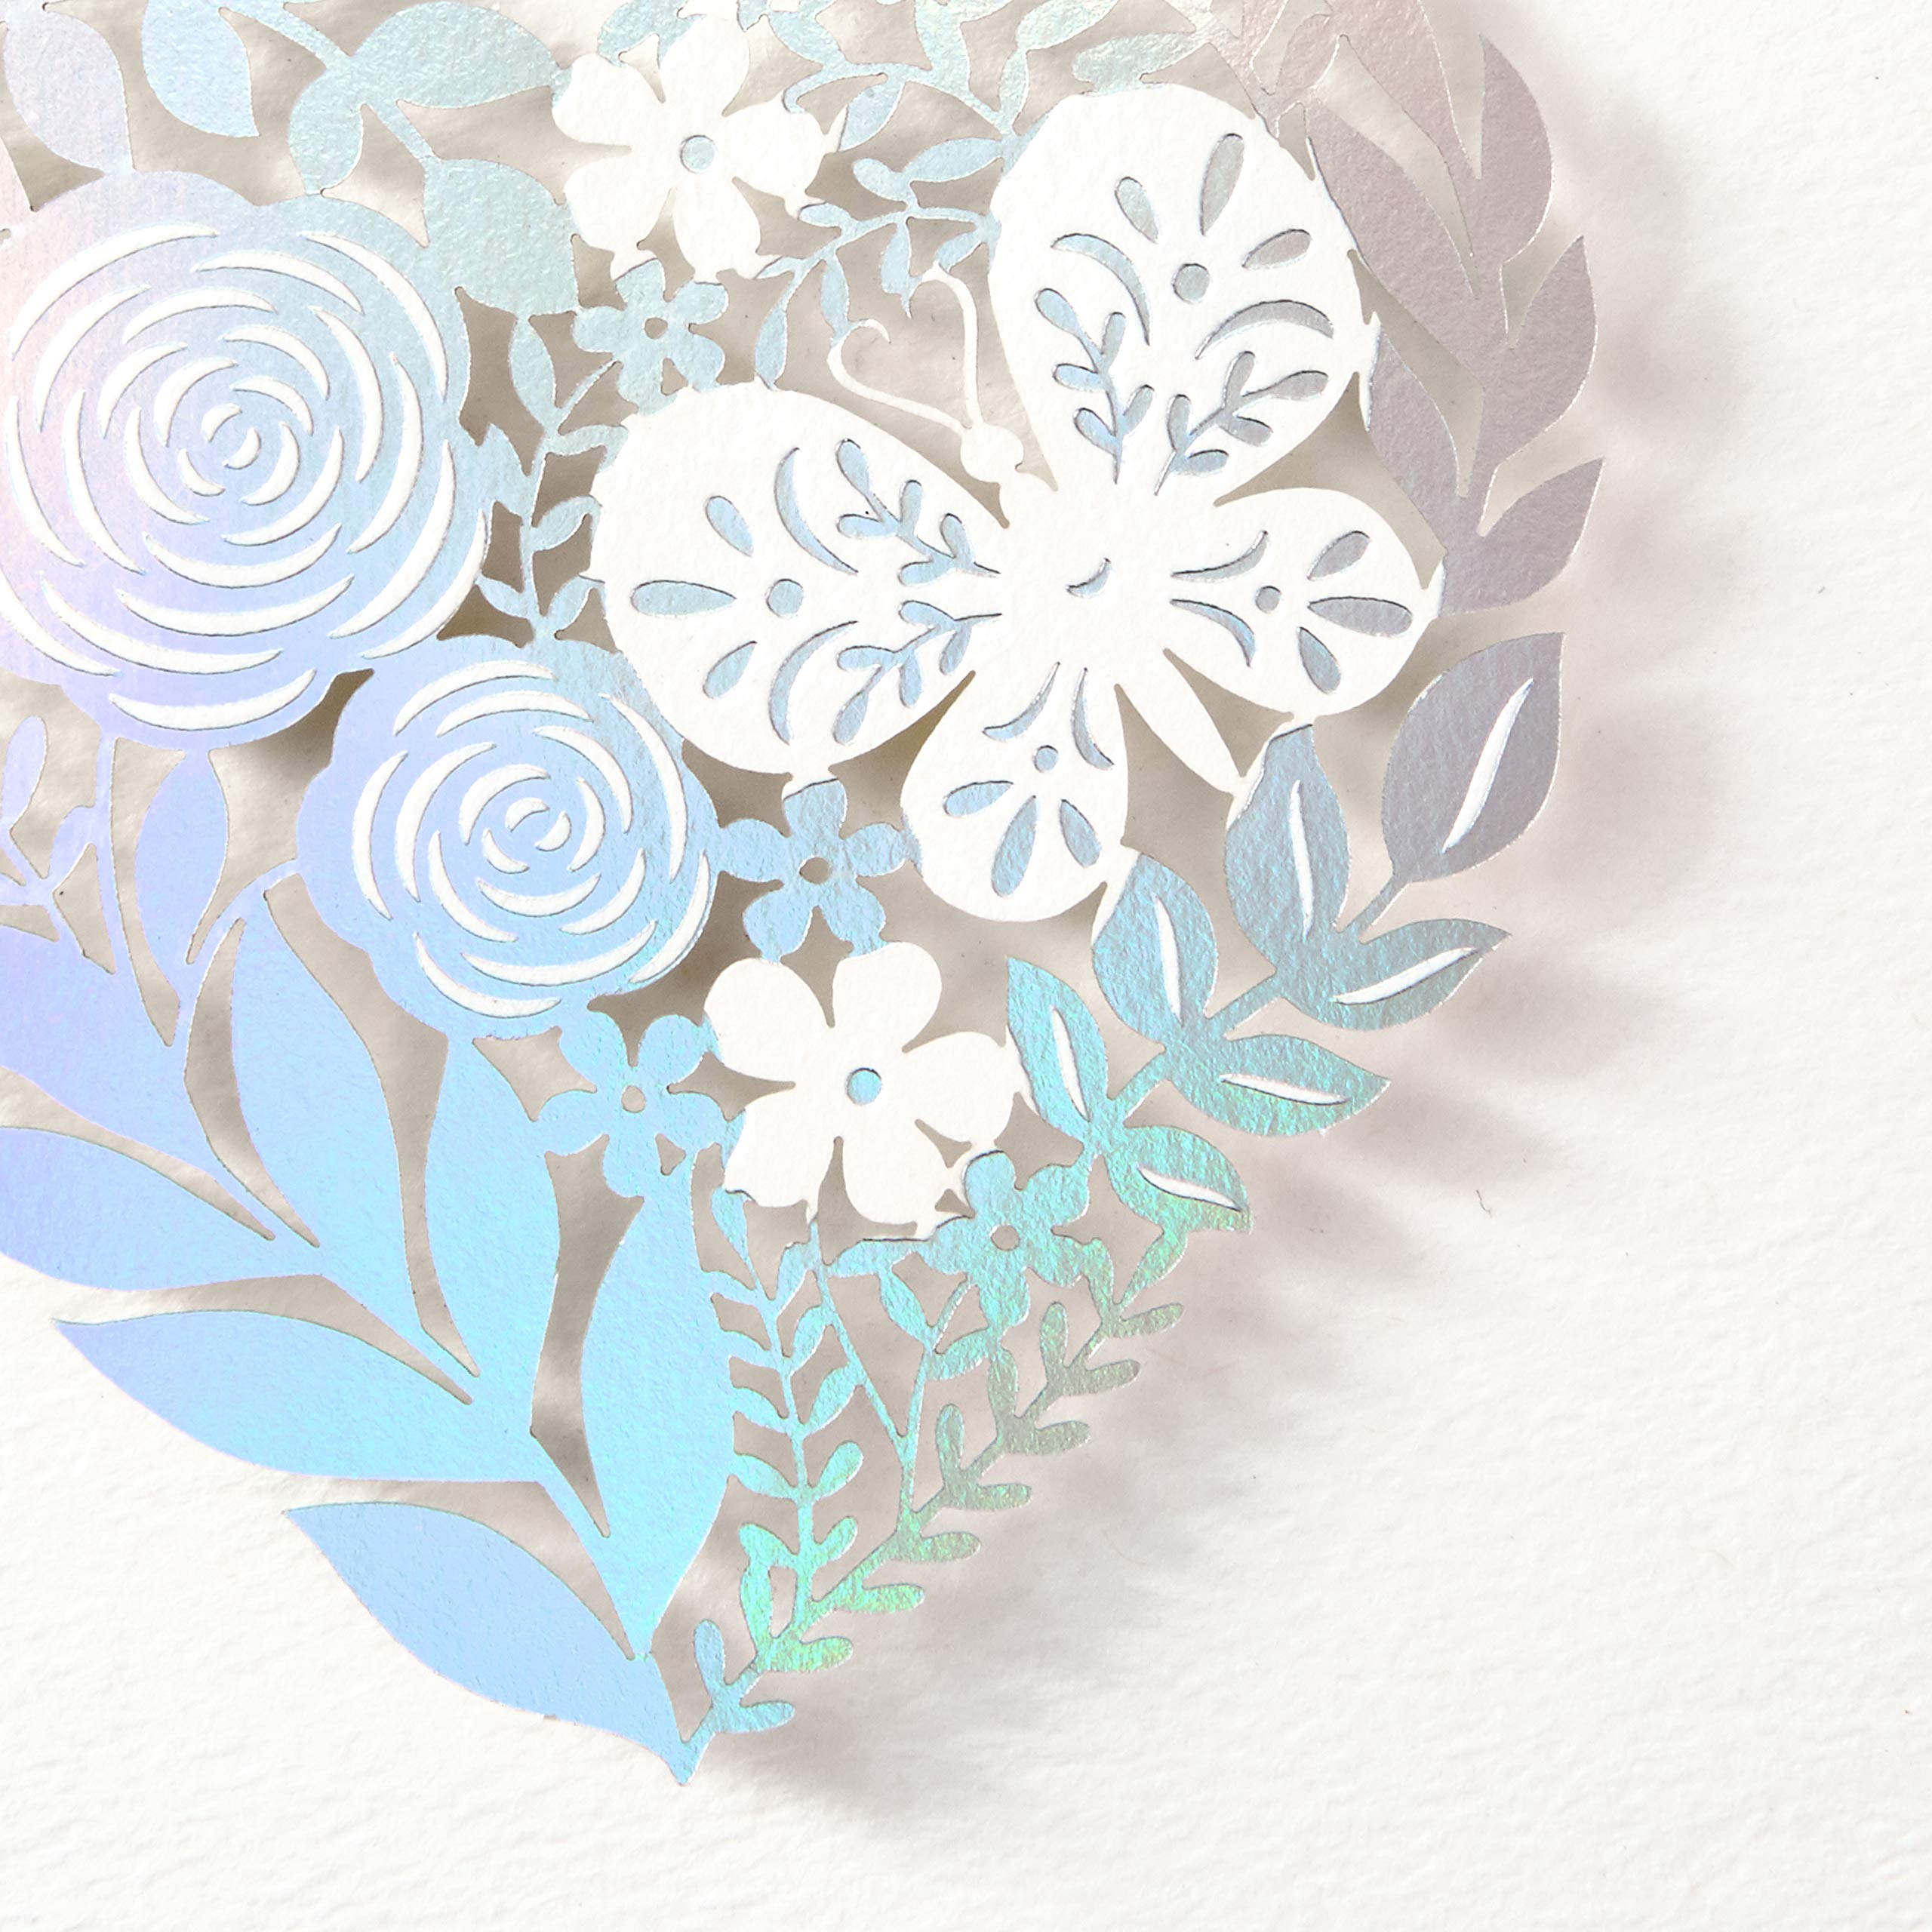 Hallmark Signature Blank Cards, Heart and Flowers (8 Cards with Envelopes)